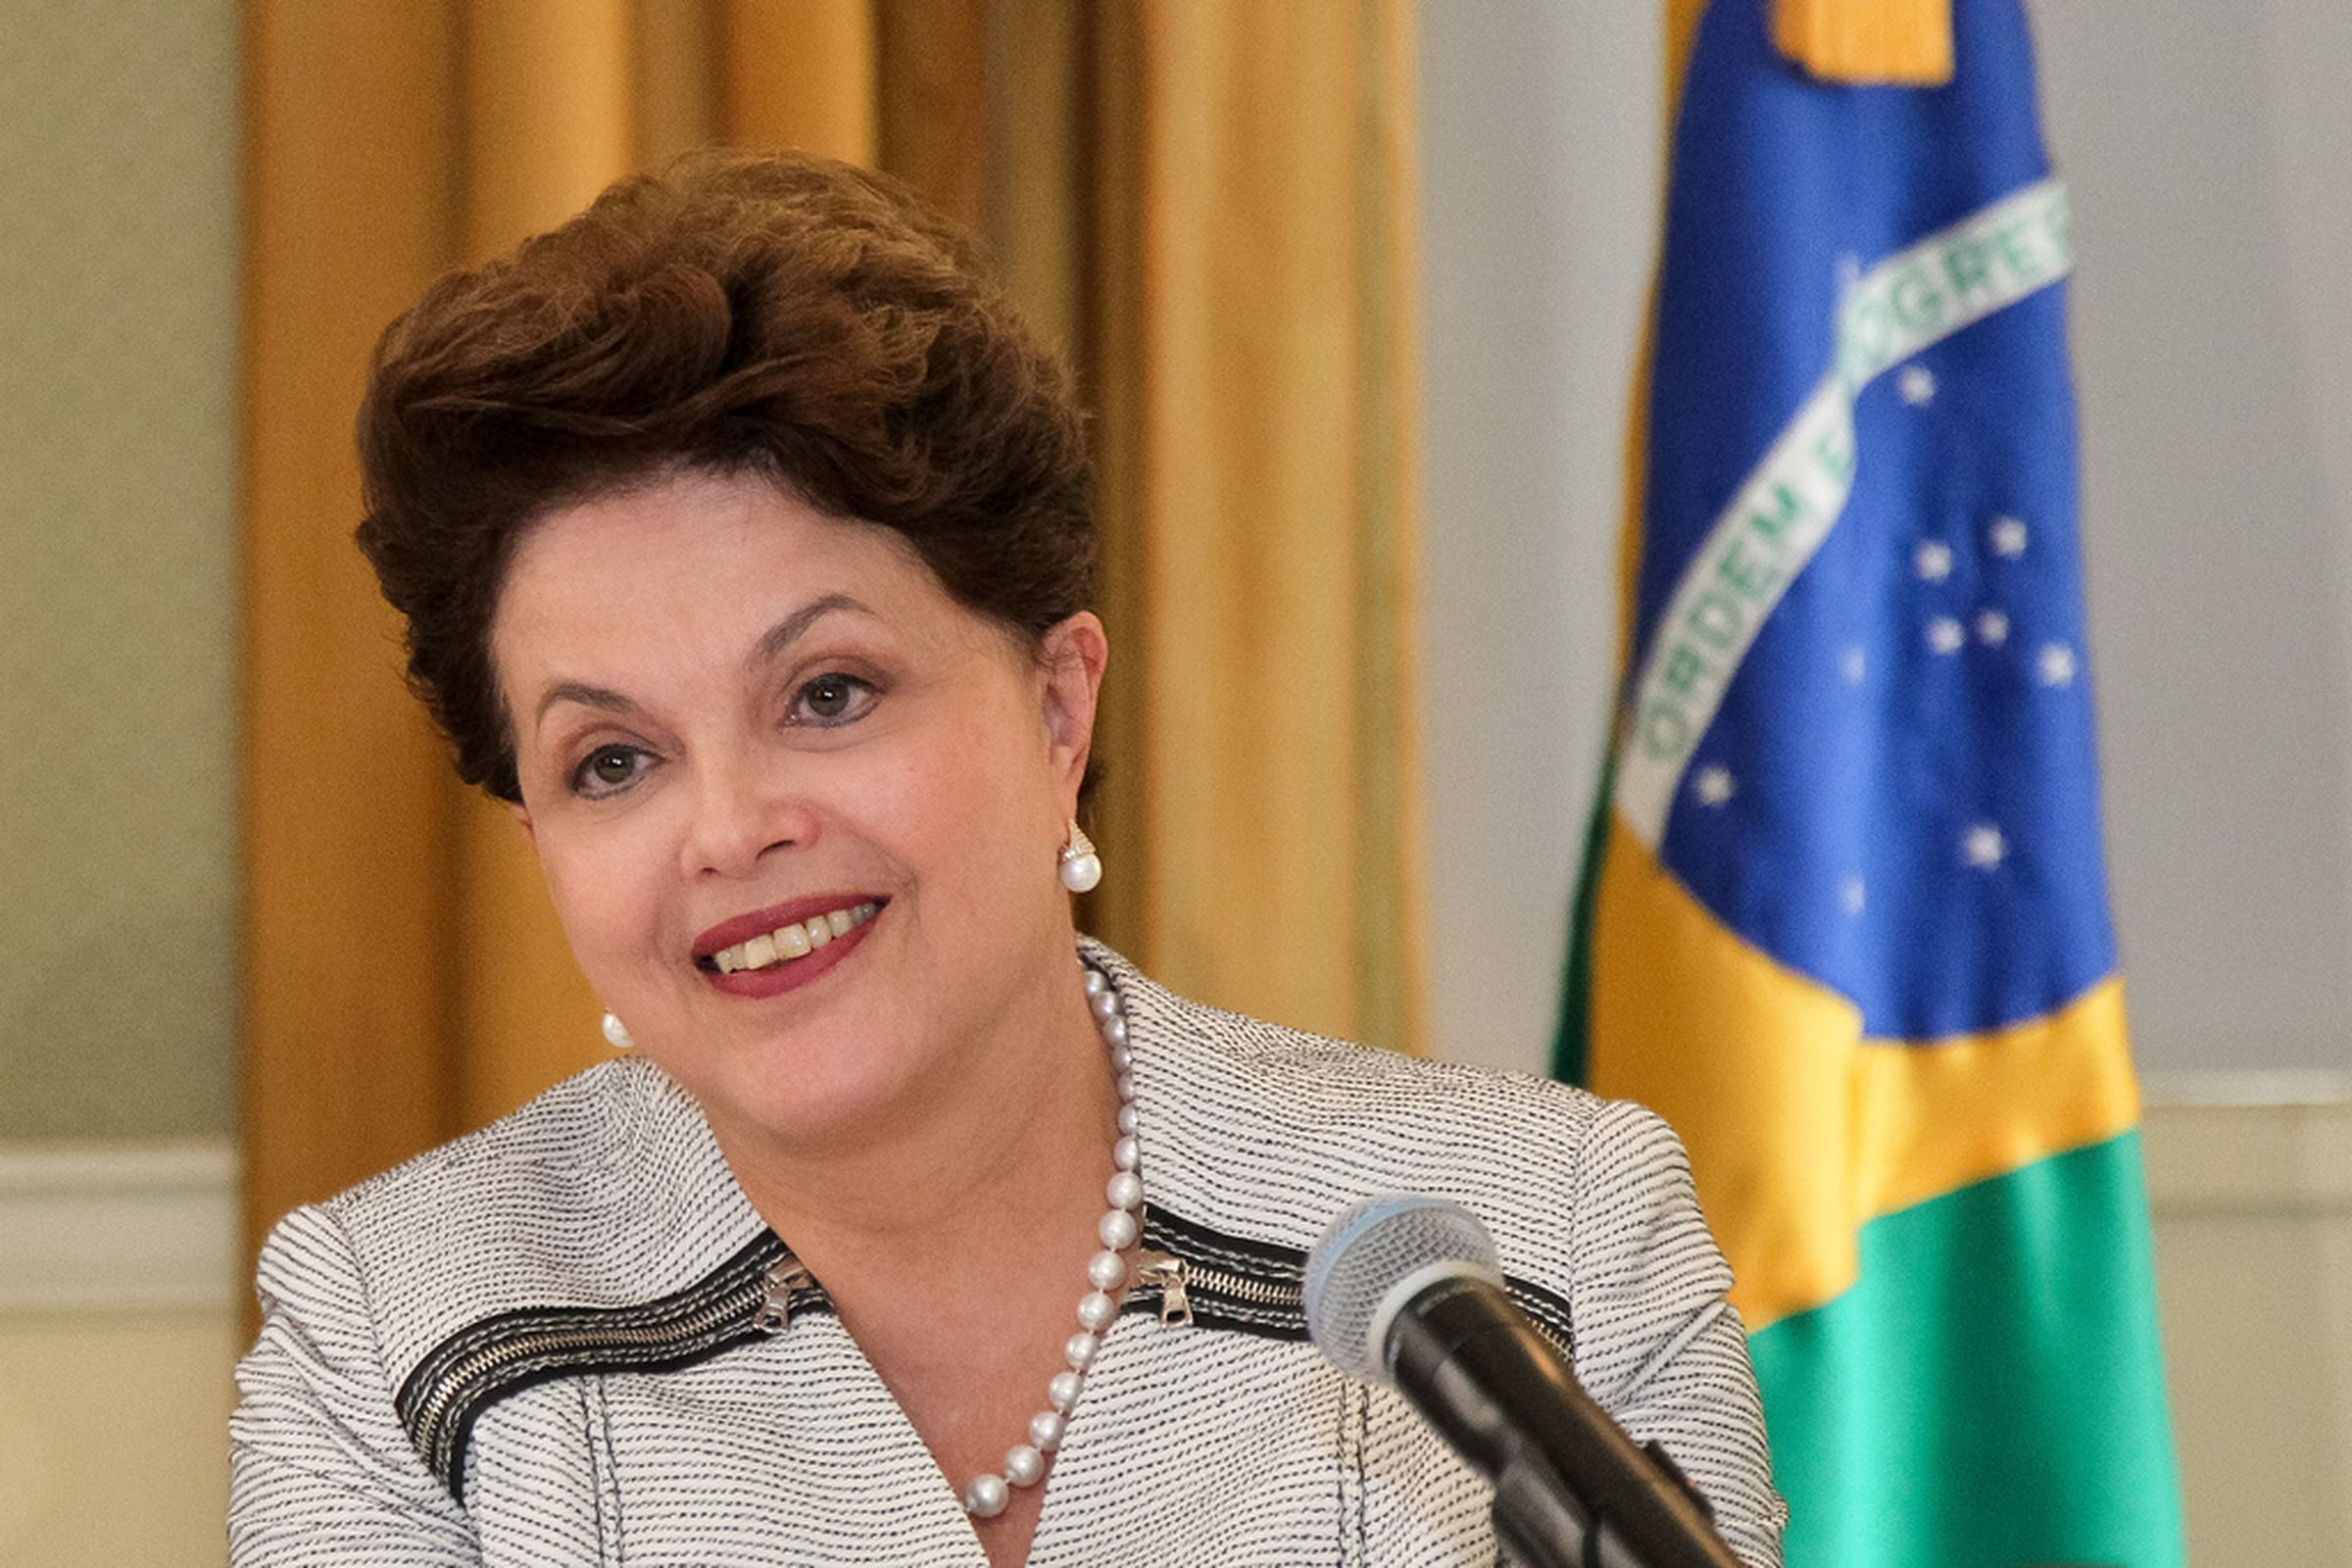 rousseff (official flickr page)